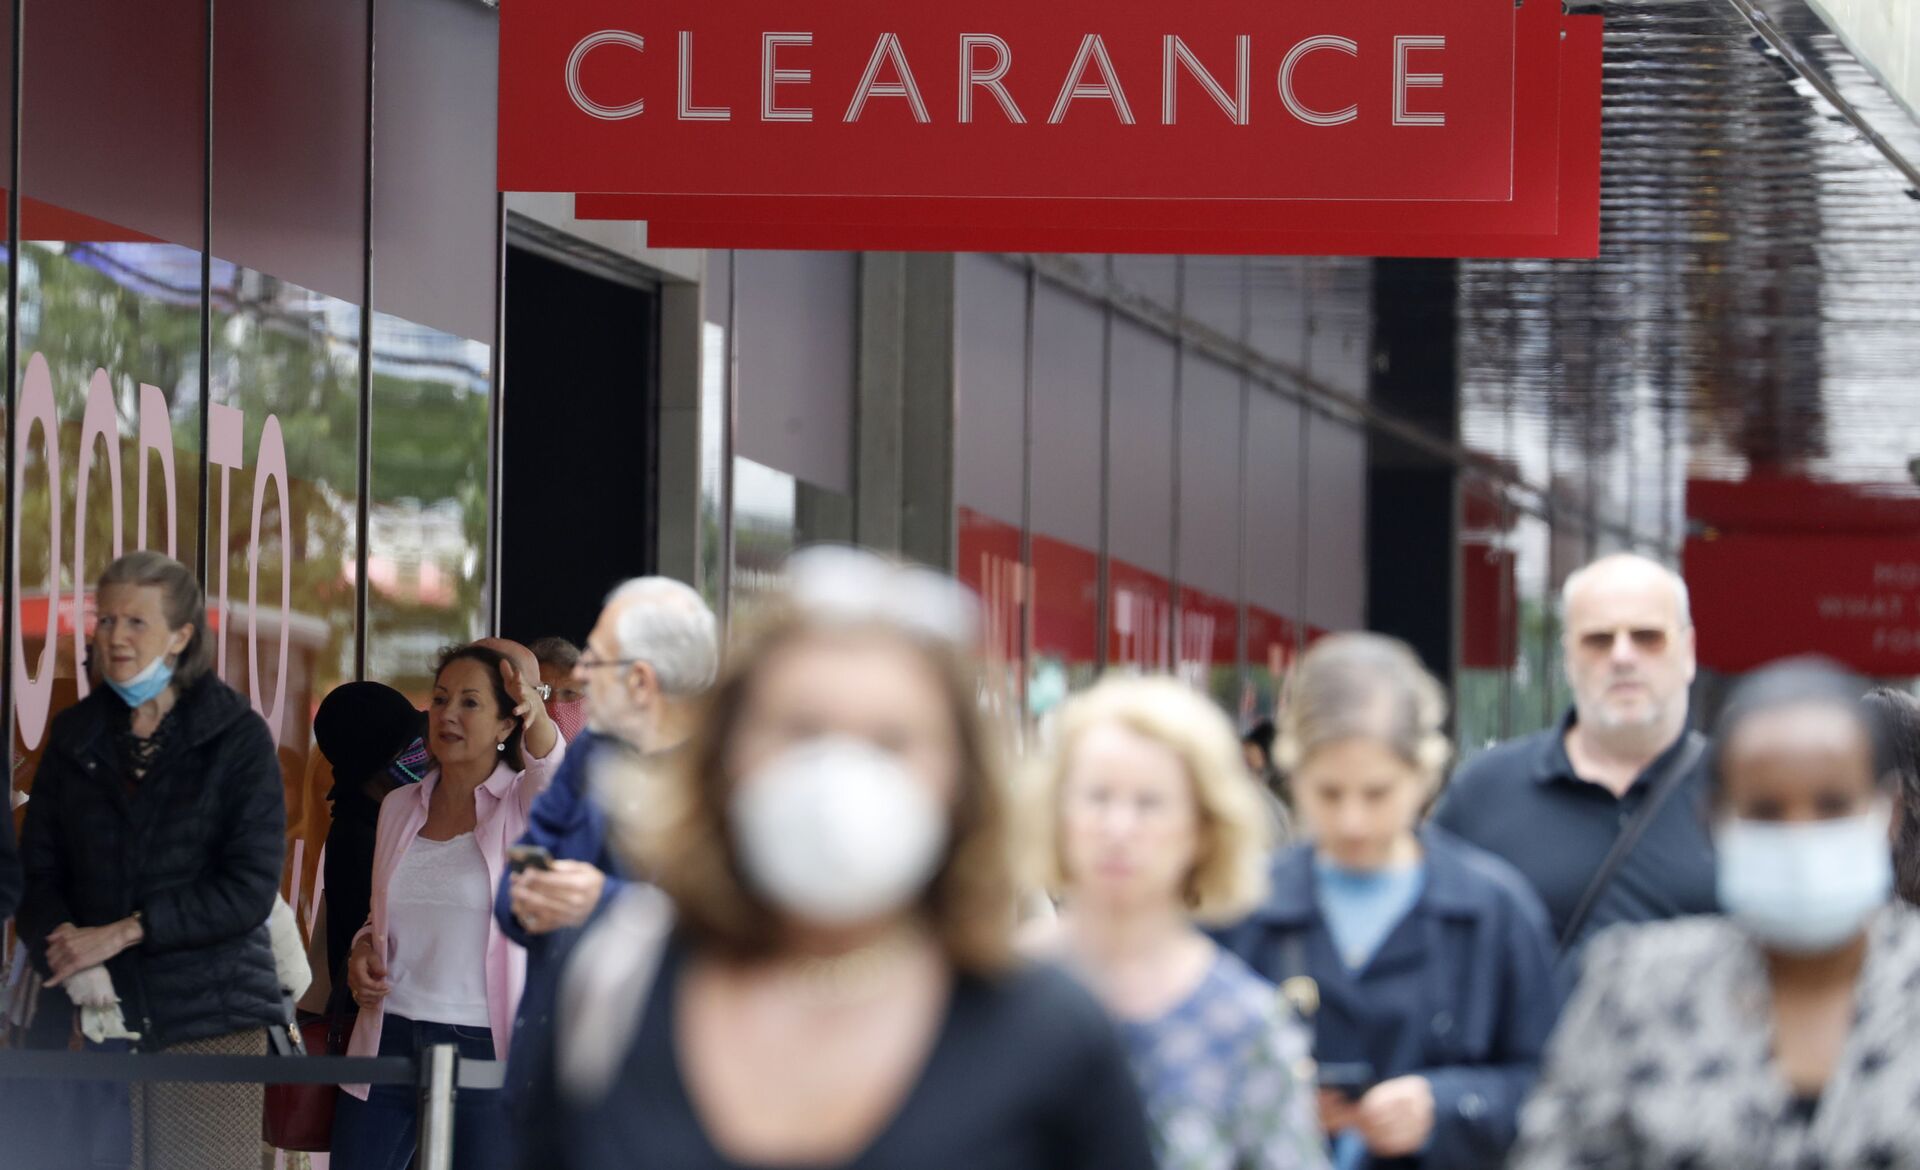 People, some wearing masks queue outside a John Lewis store, in London, Thursday, July 16, 2020. Unemployment across the U.K. has held steady during the coronavirus lockdown as a result of a government salary support scheme, but there are clear signals emerging that job losses will skyrocket over coming months - Sputnik International, 1920, 06.10.2021